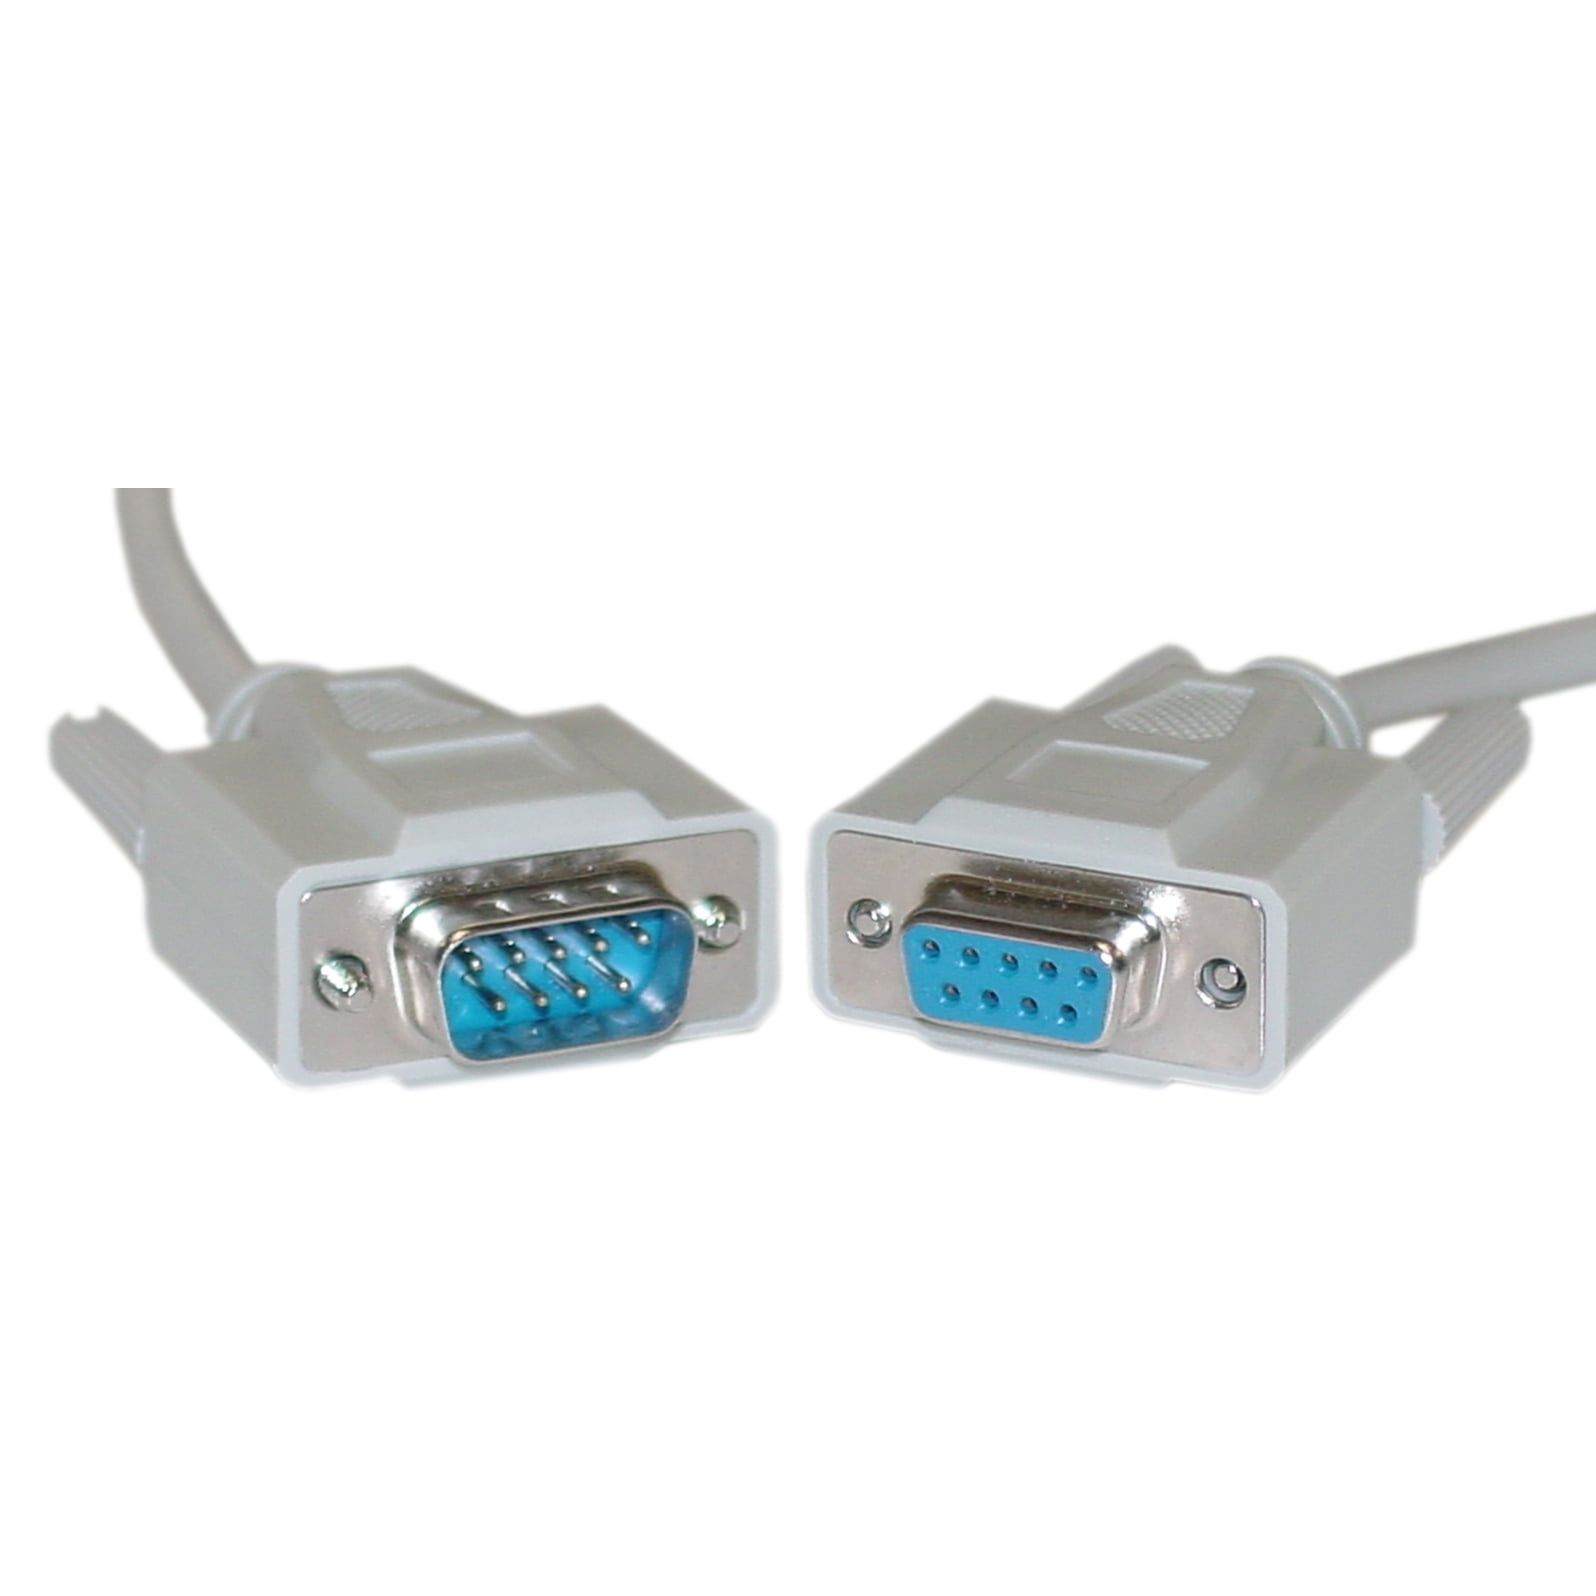 Null Modem Cable, DB9 Male to DB9 Female, UL 8 Conductor, 10 Walmart.com